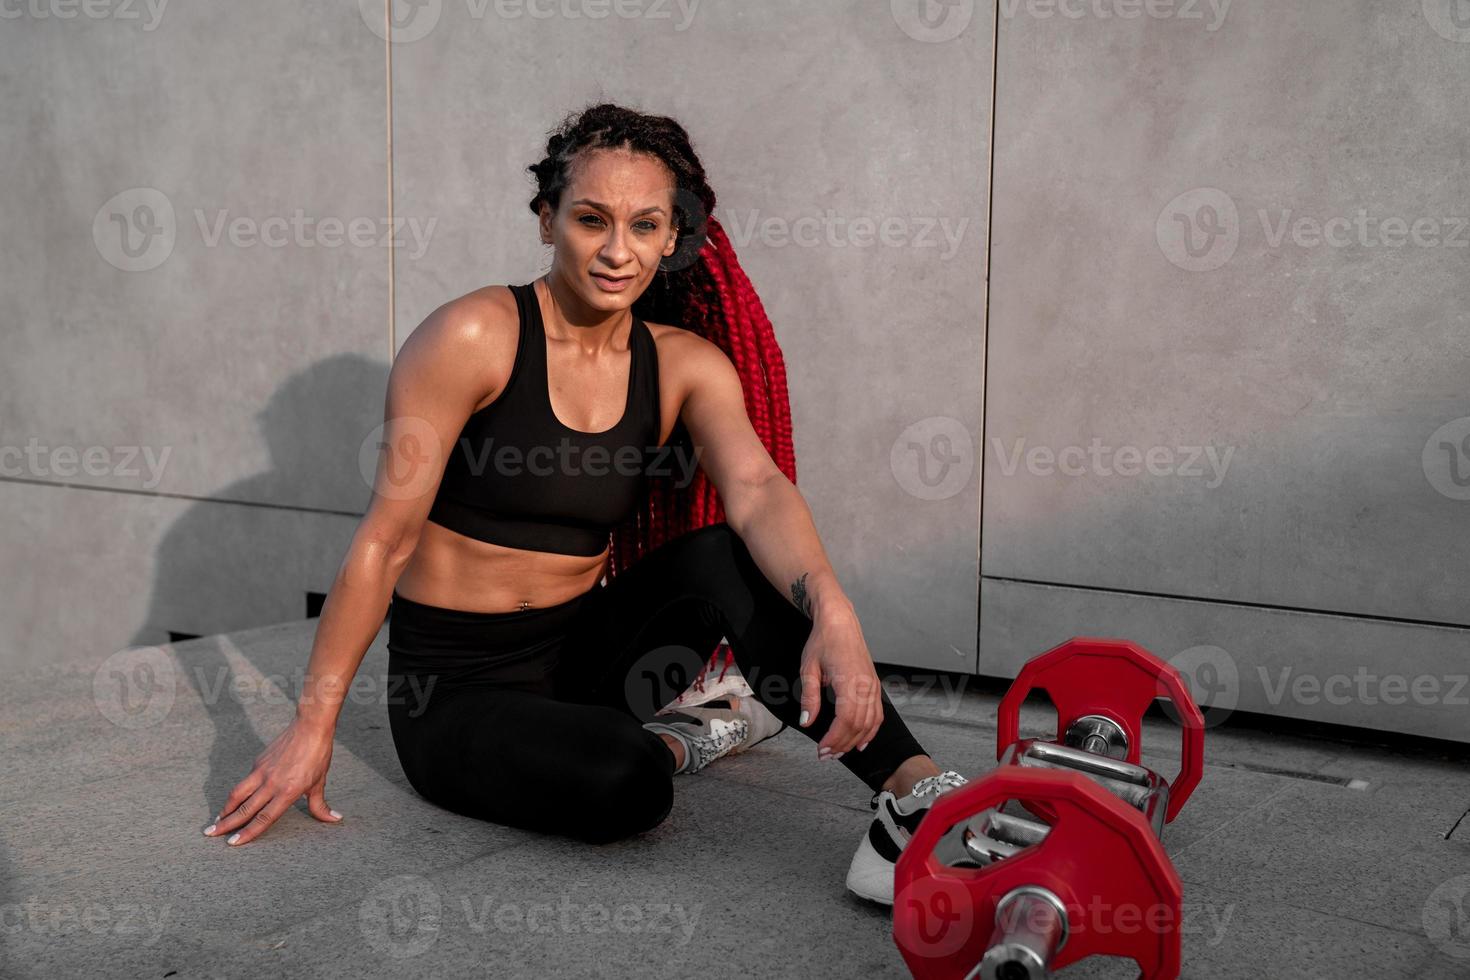 Personal Trainer Helping Woman at Gym Stock Image - Image of power